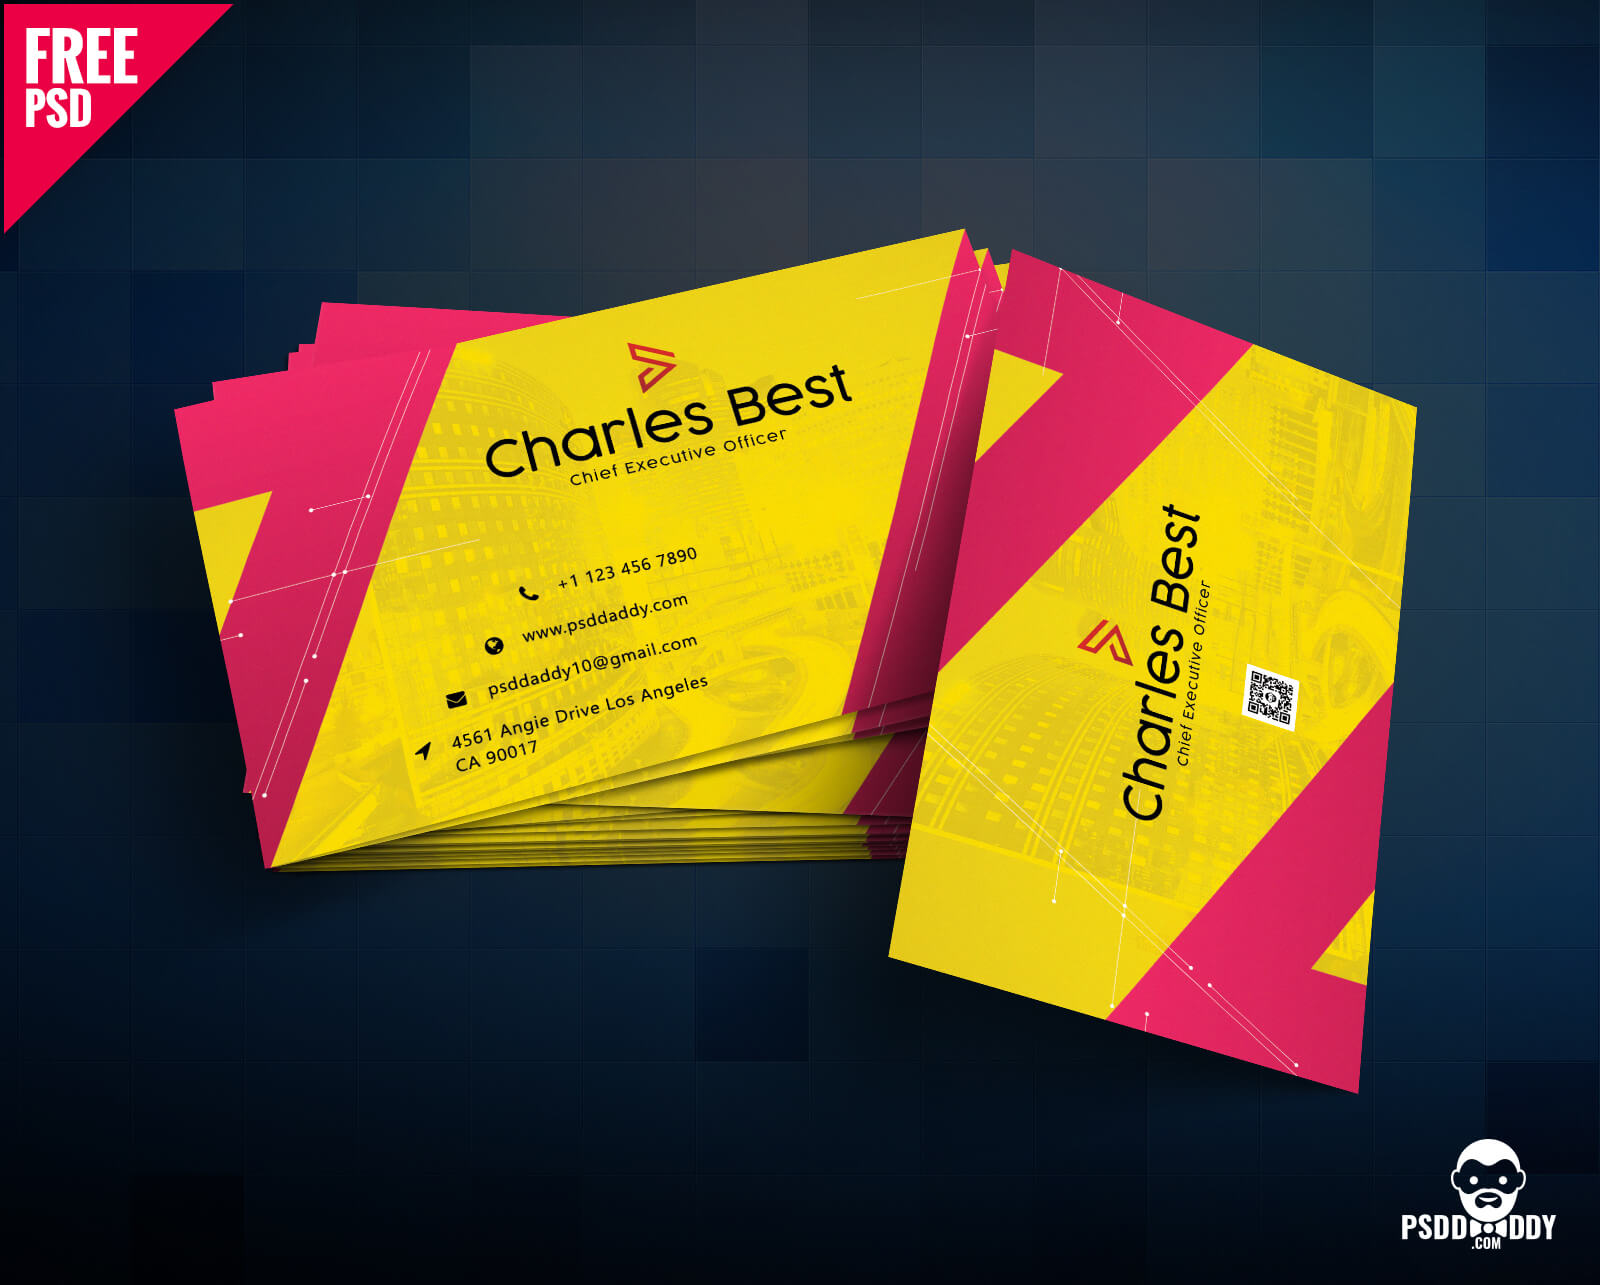 Download] Creative Business Card Free Psd | Psddaddy With Regard To Business Card Size Template Photoshop